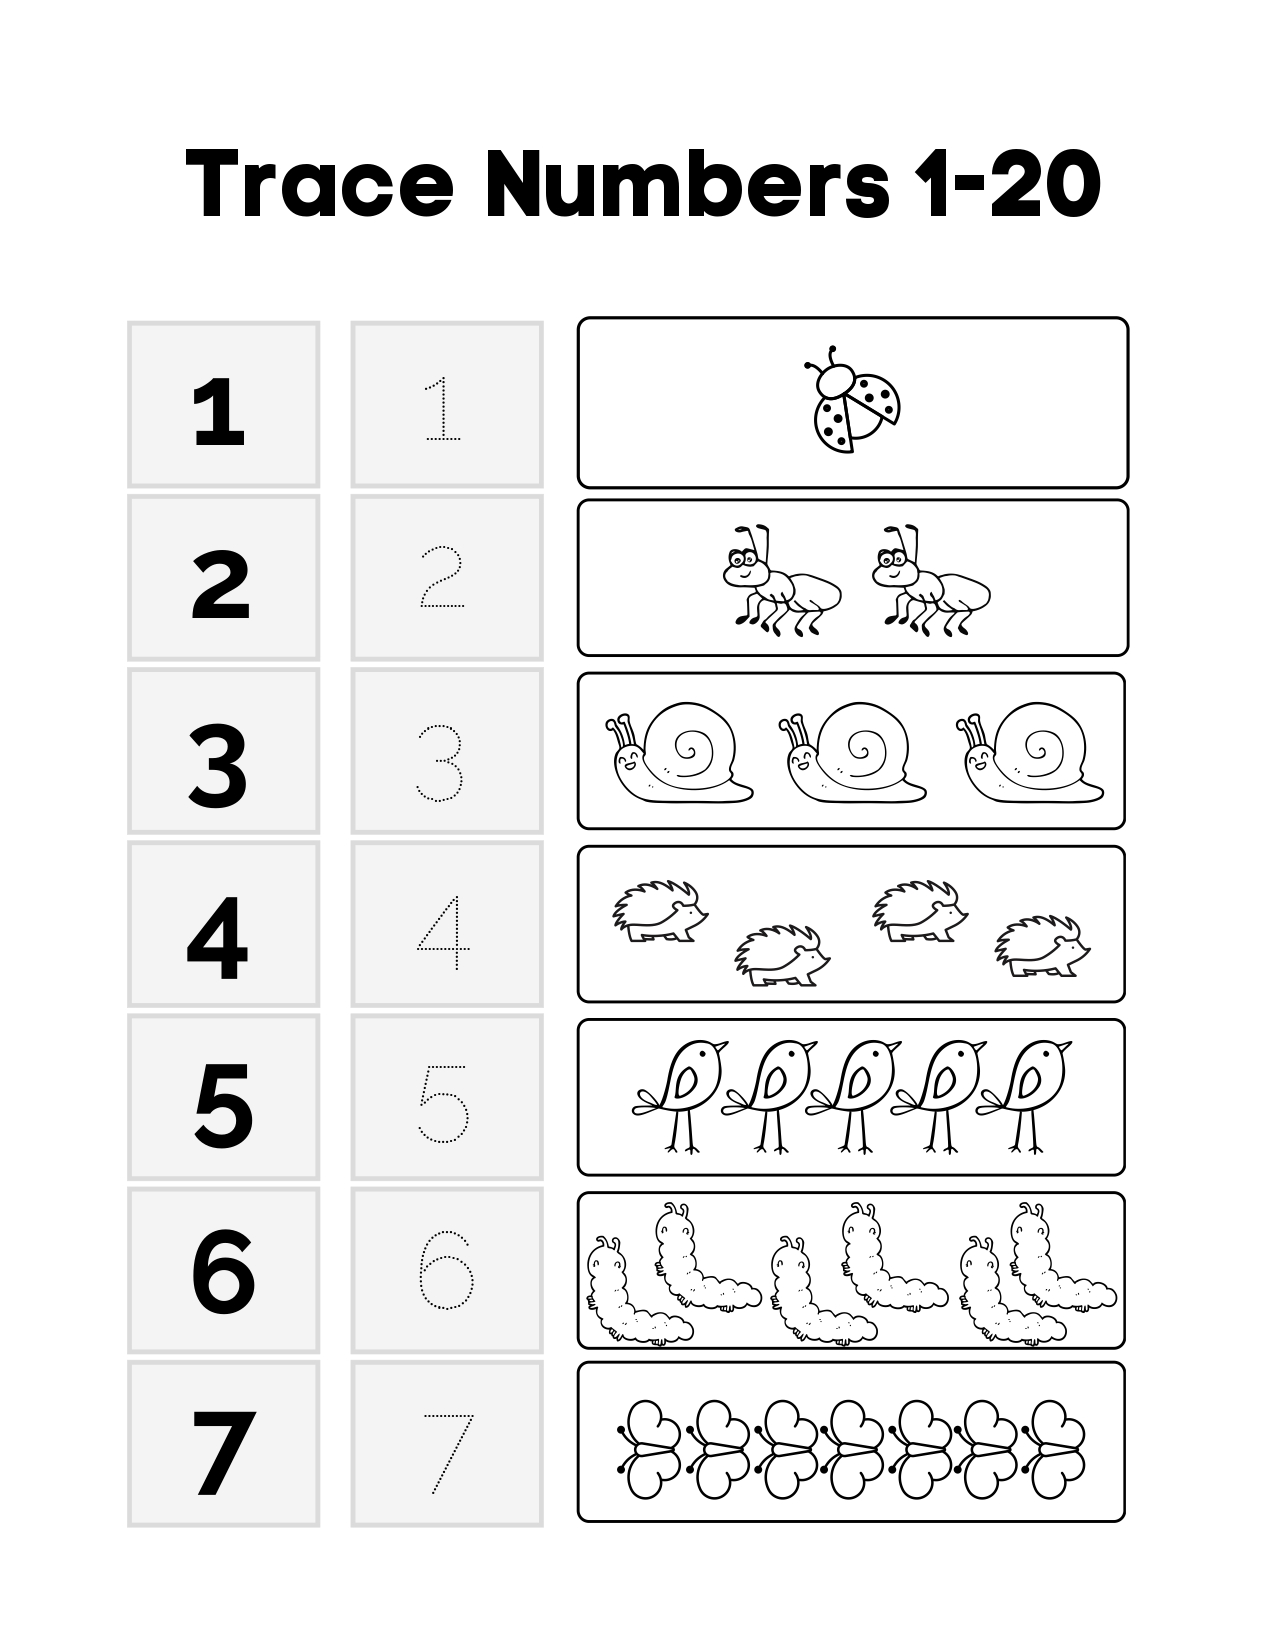 Free Tracing Numbers Worksheets 1-20 with Farm Animals | Mrs. Merry